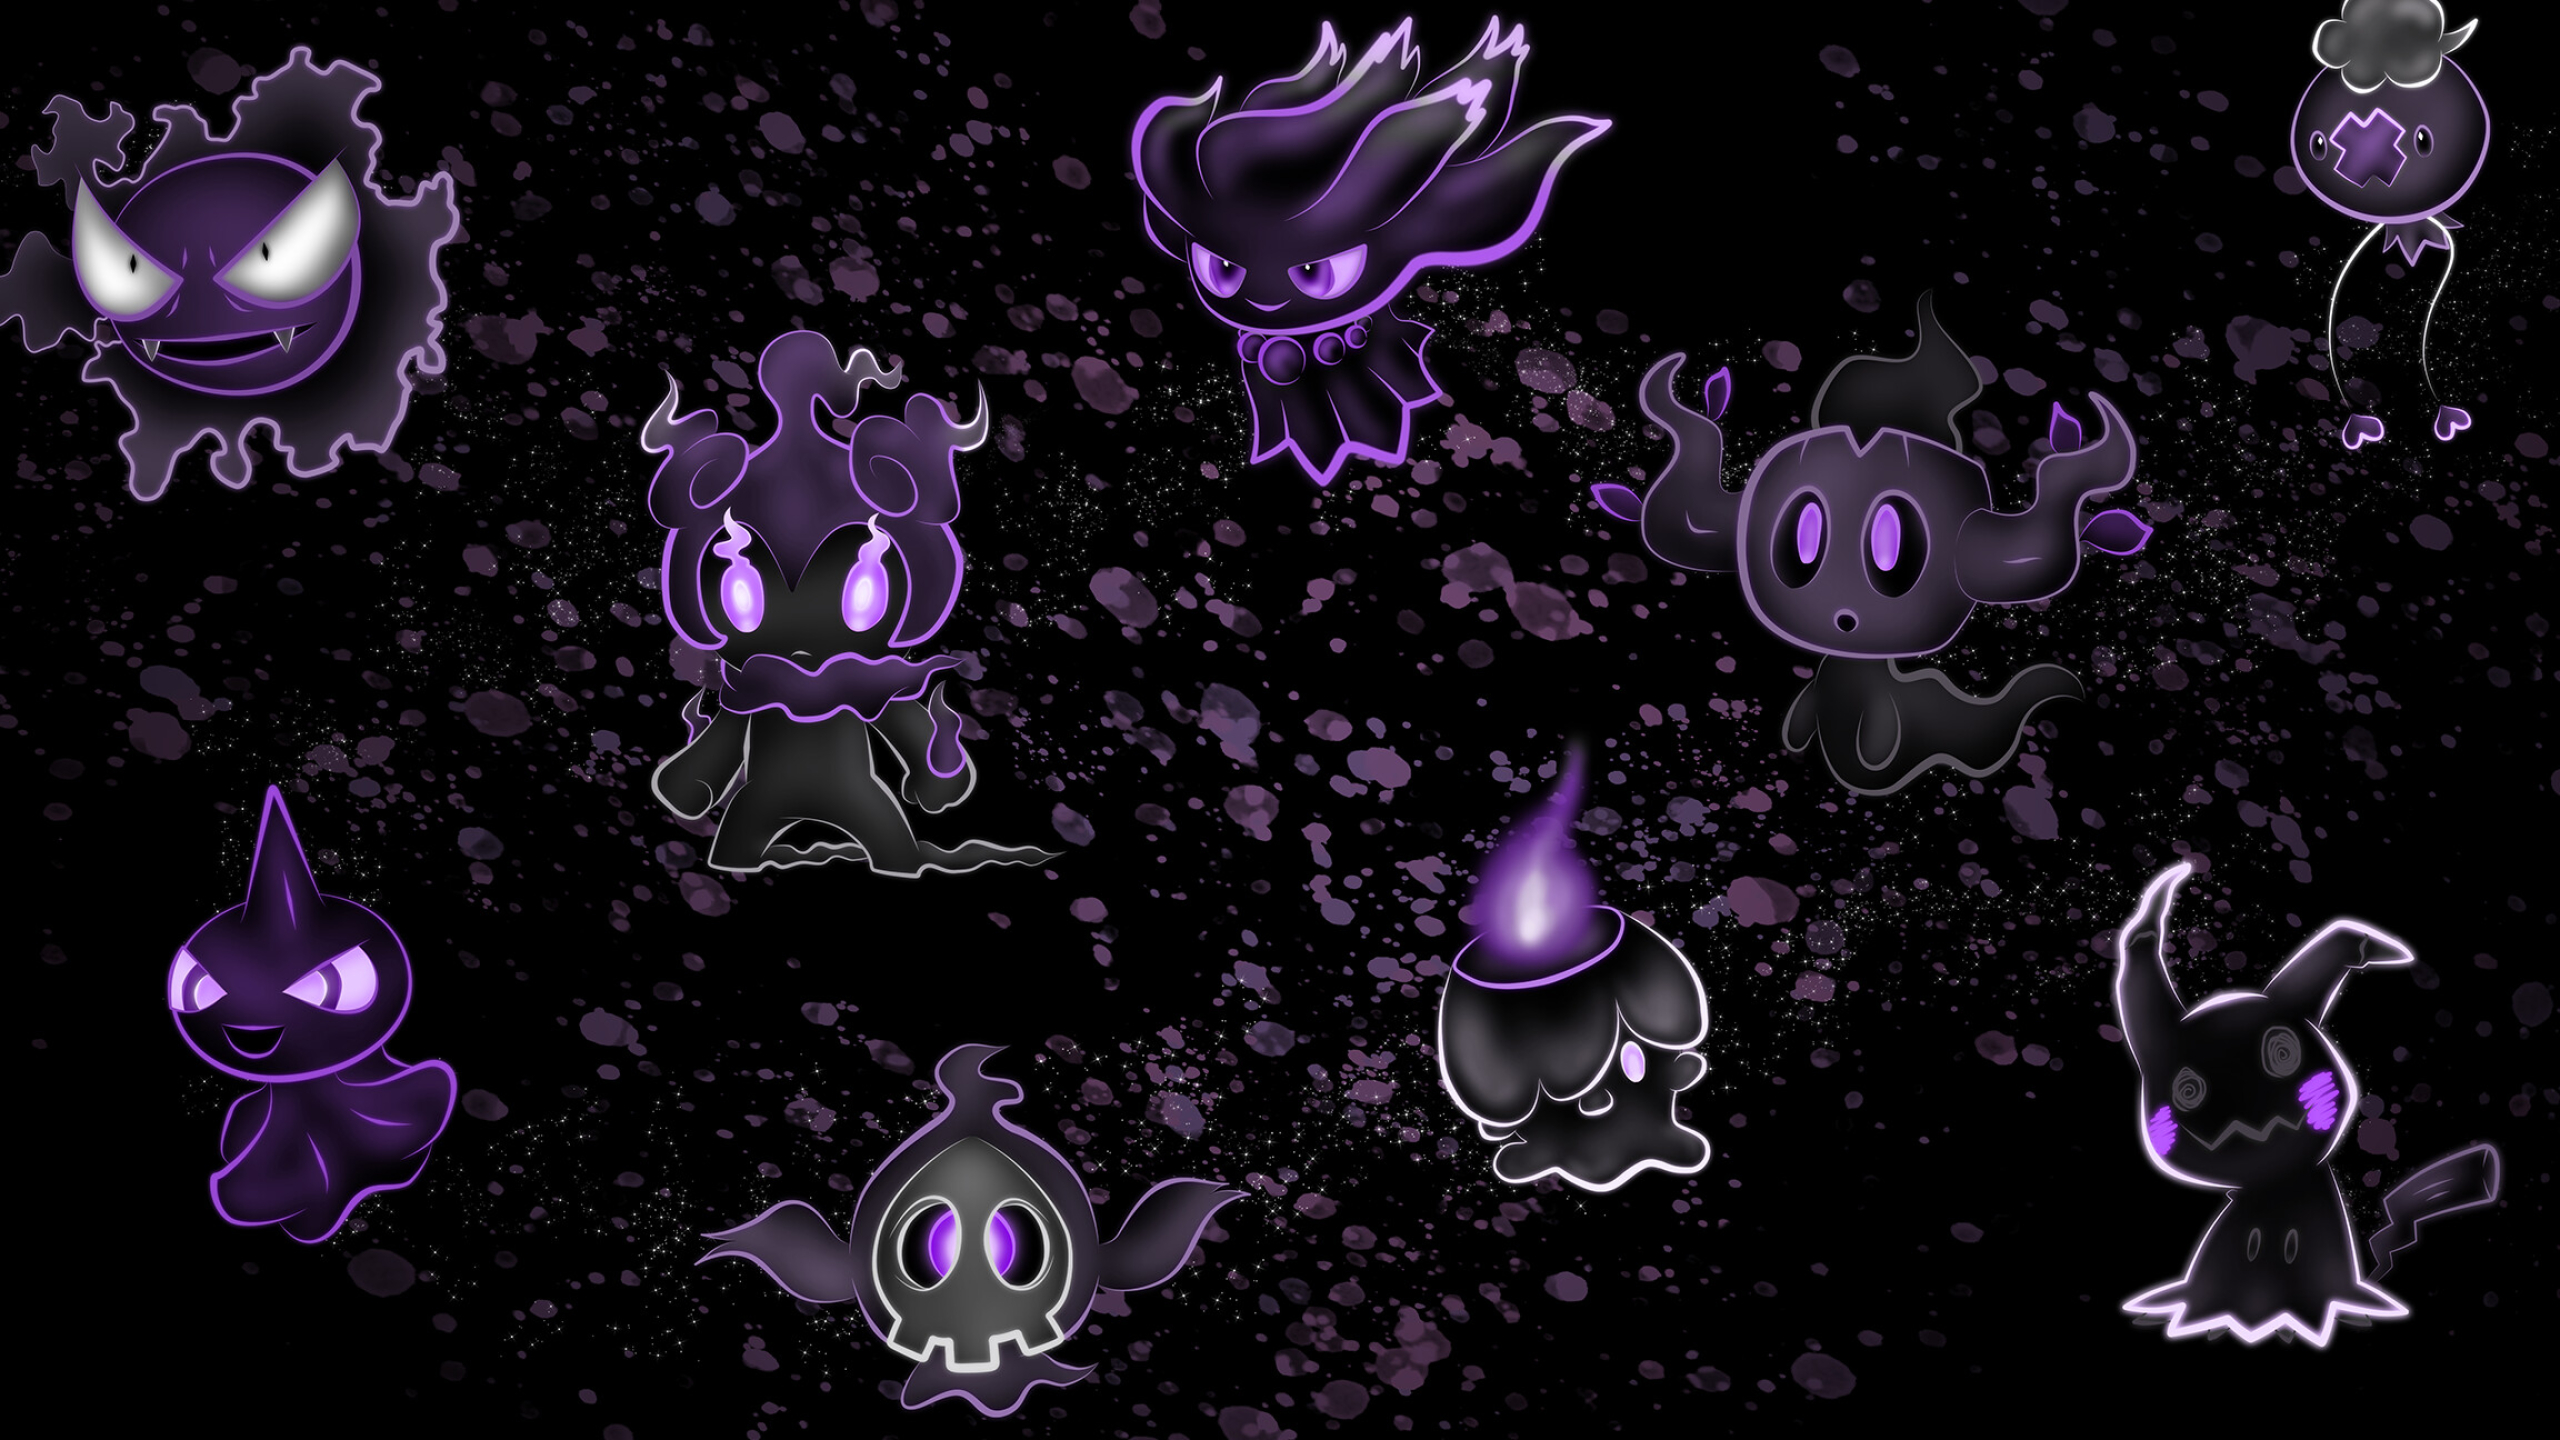 Ghost Pokemon: This type is associated with death and the afterlife. 2560x1440 HD Background.